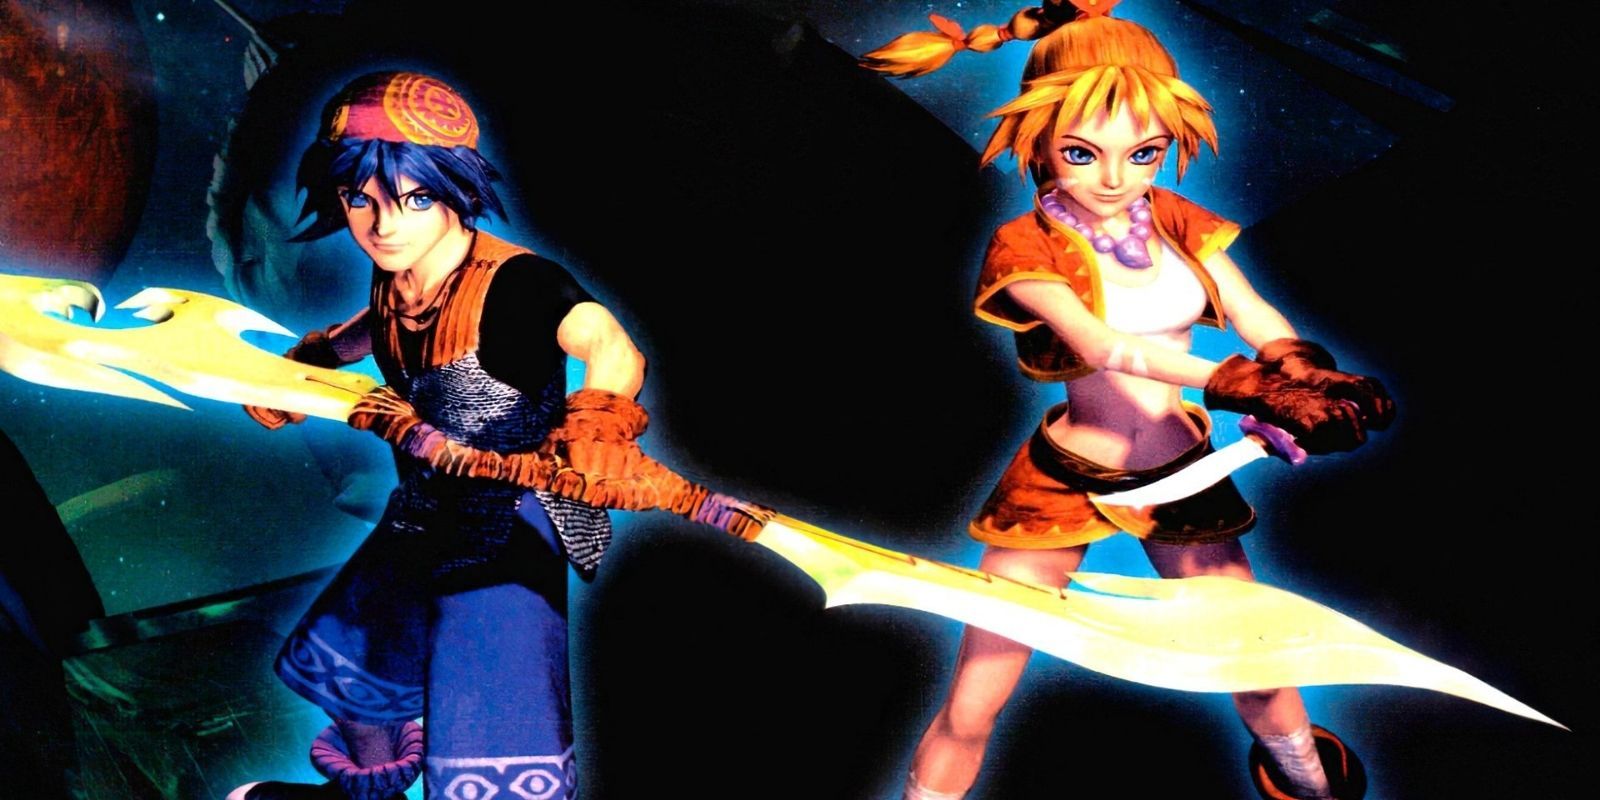 The main characters of the hit PlayStation One game Chrono Cross